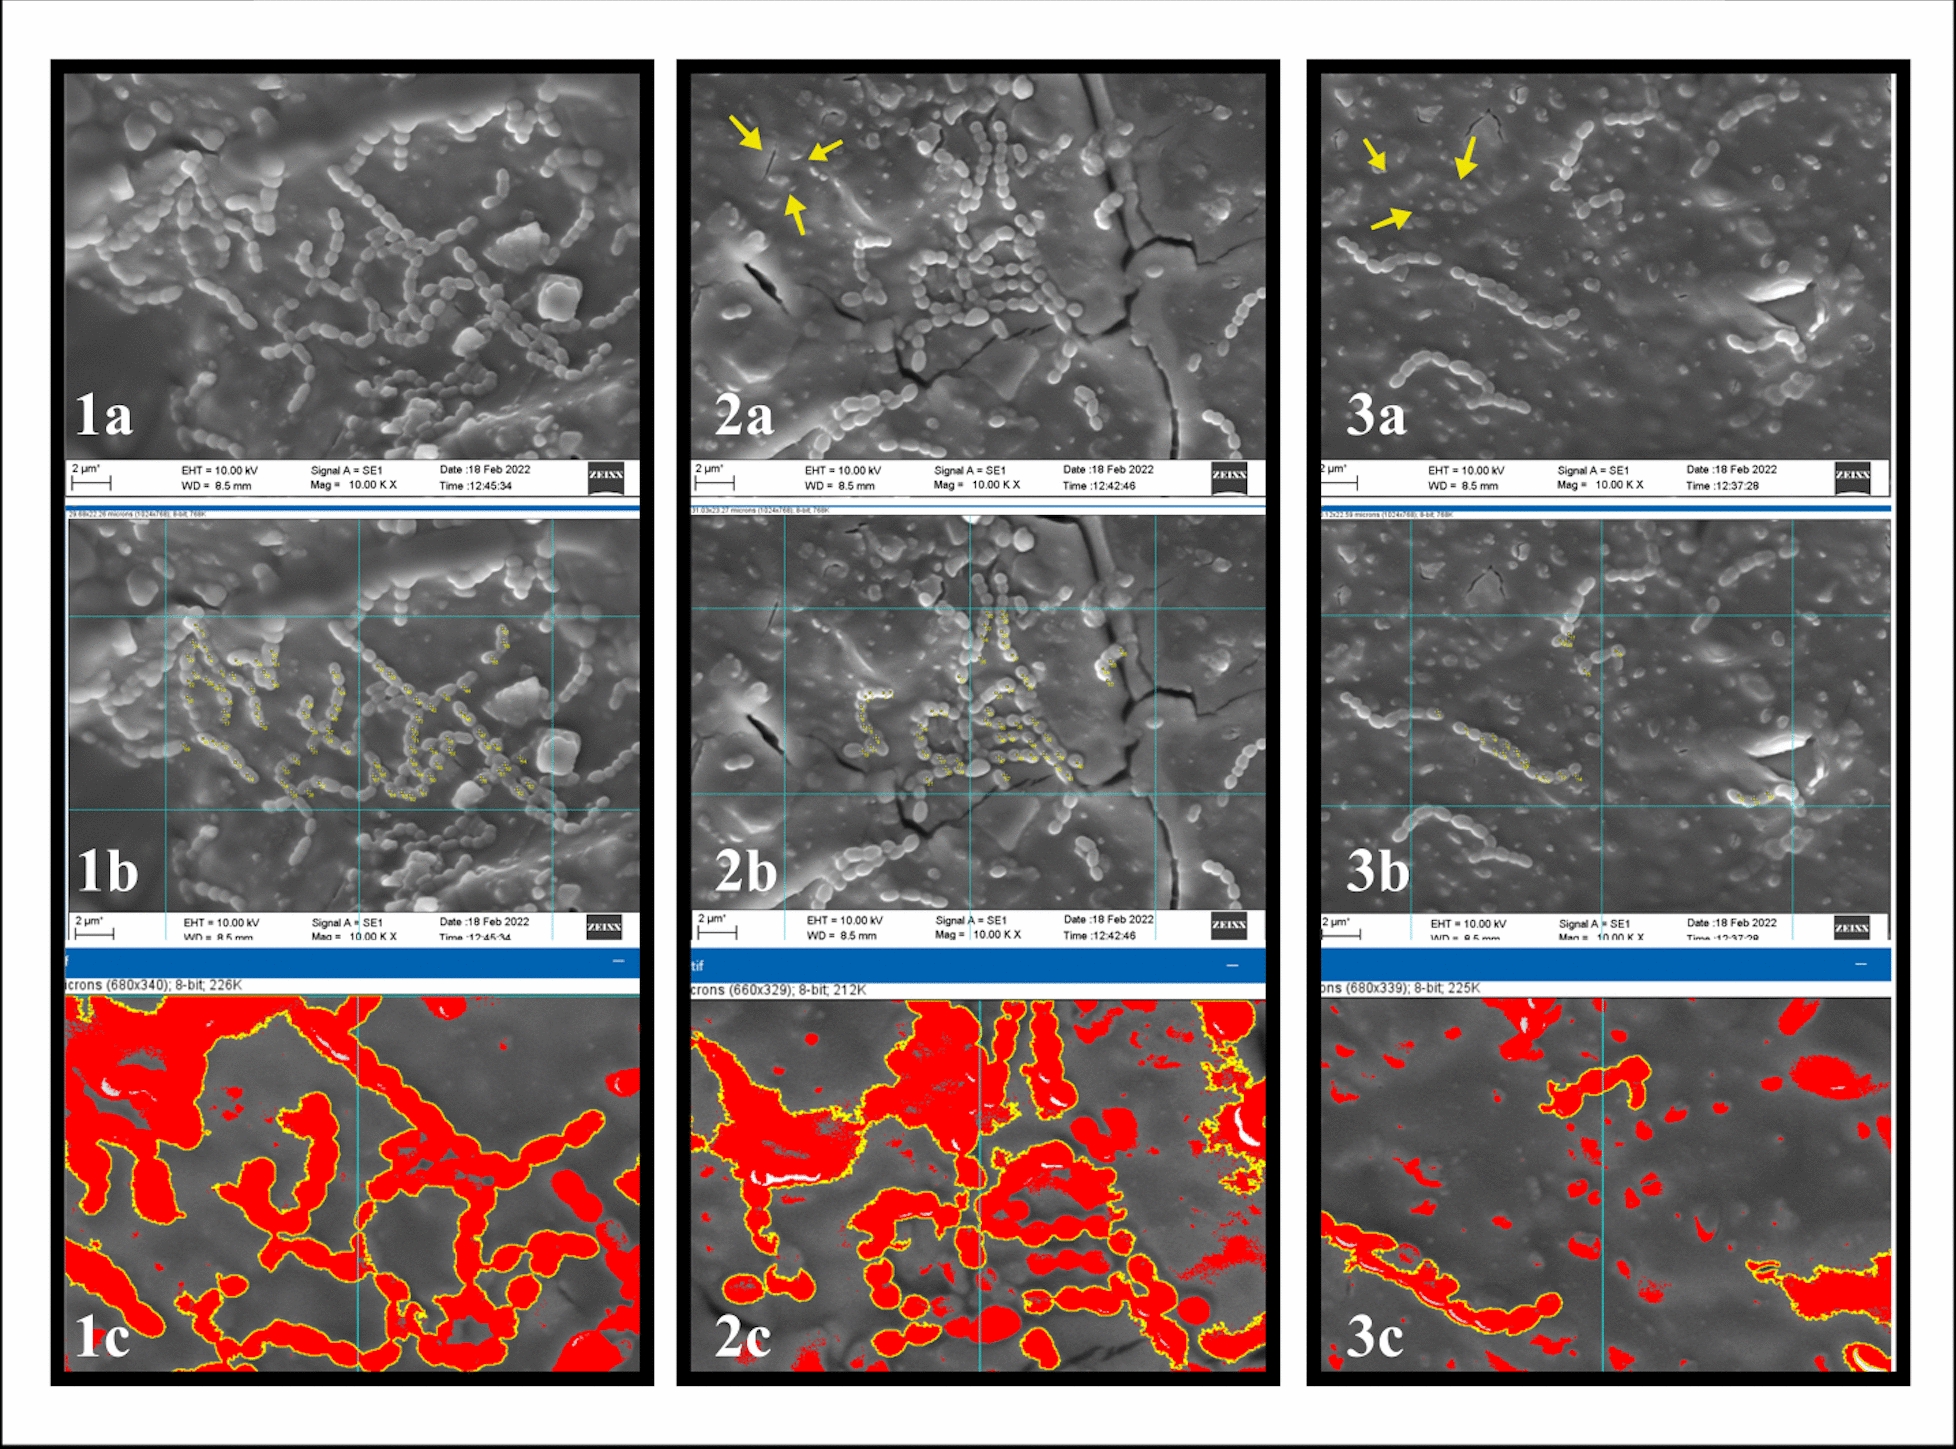 Addition of nisin to high-viscosity glass-ionomer cement: a comparative in vitro study on antibacterial and physical properties